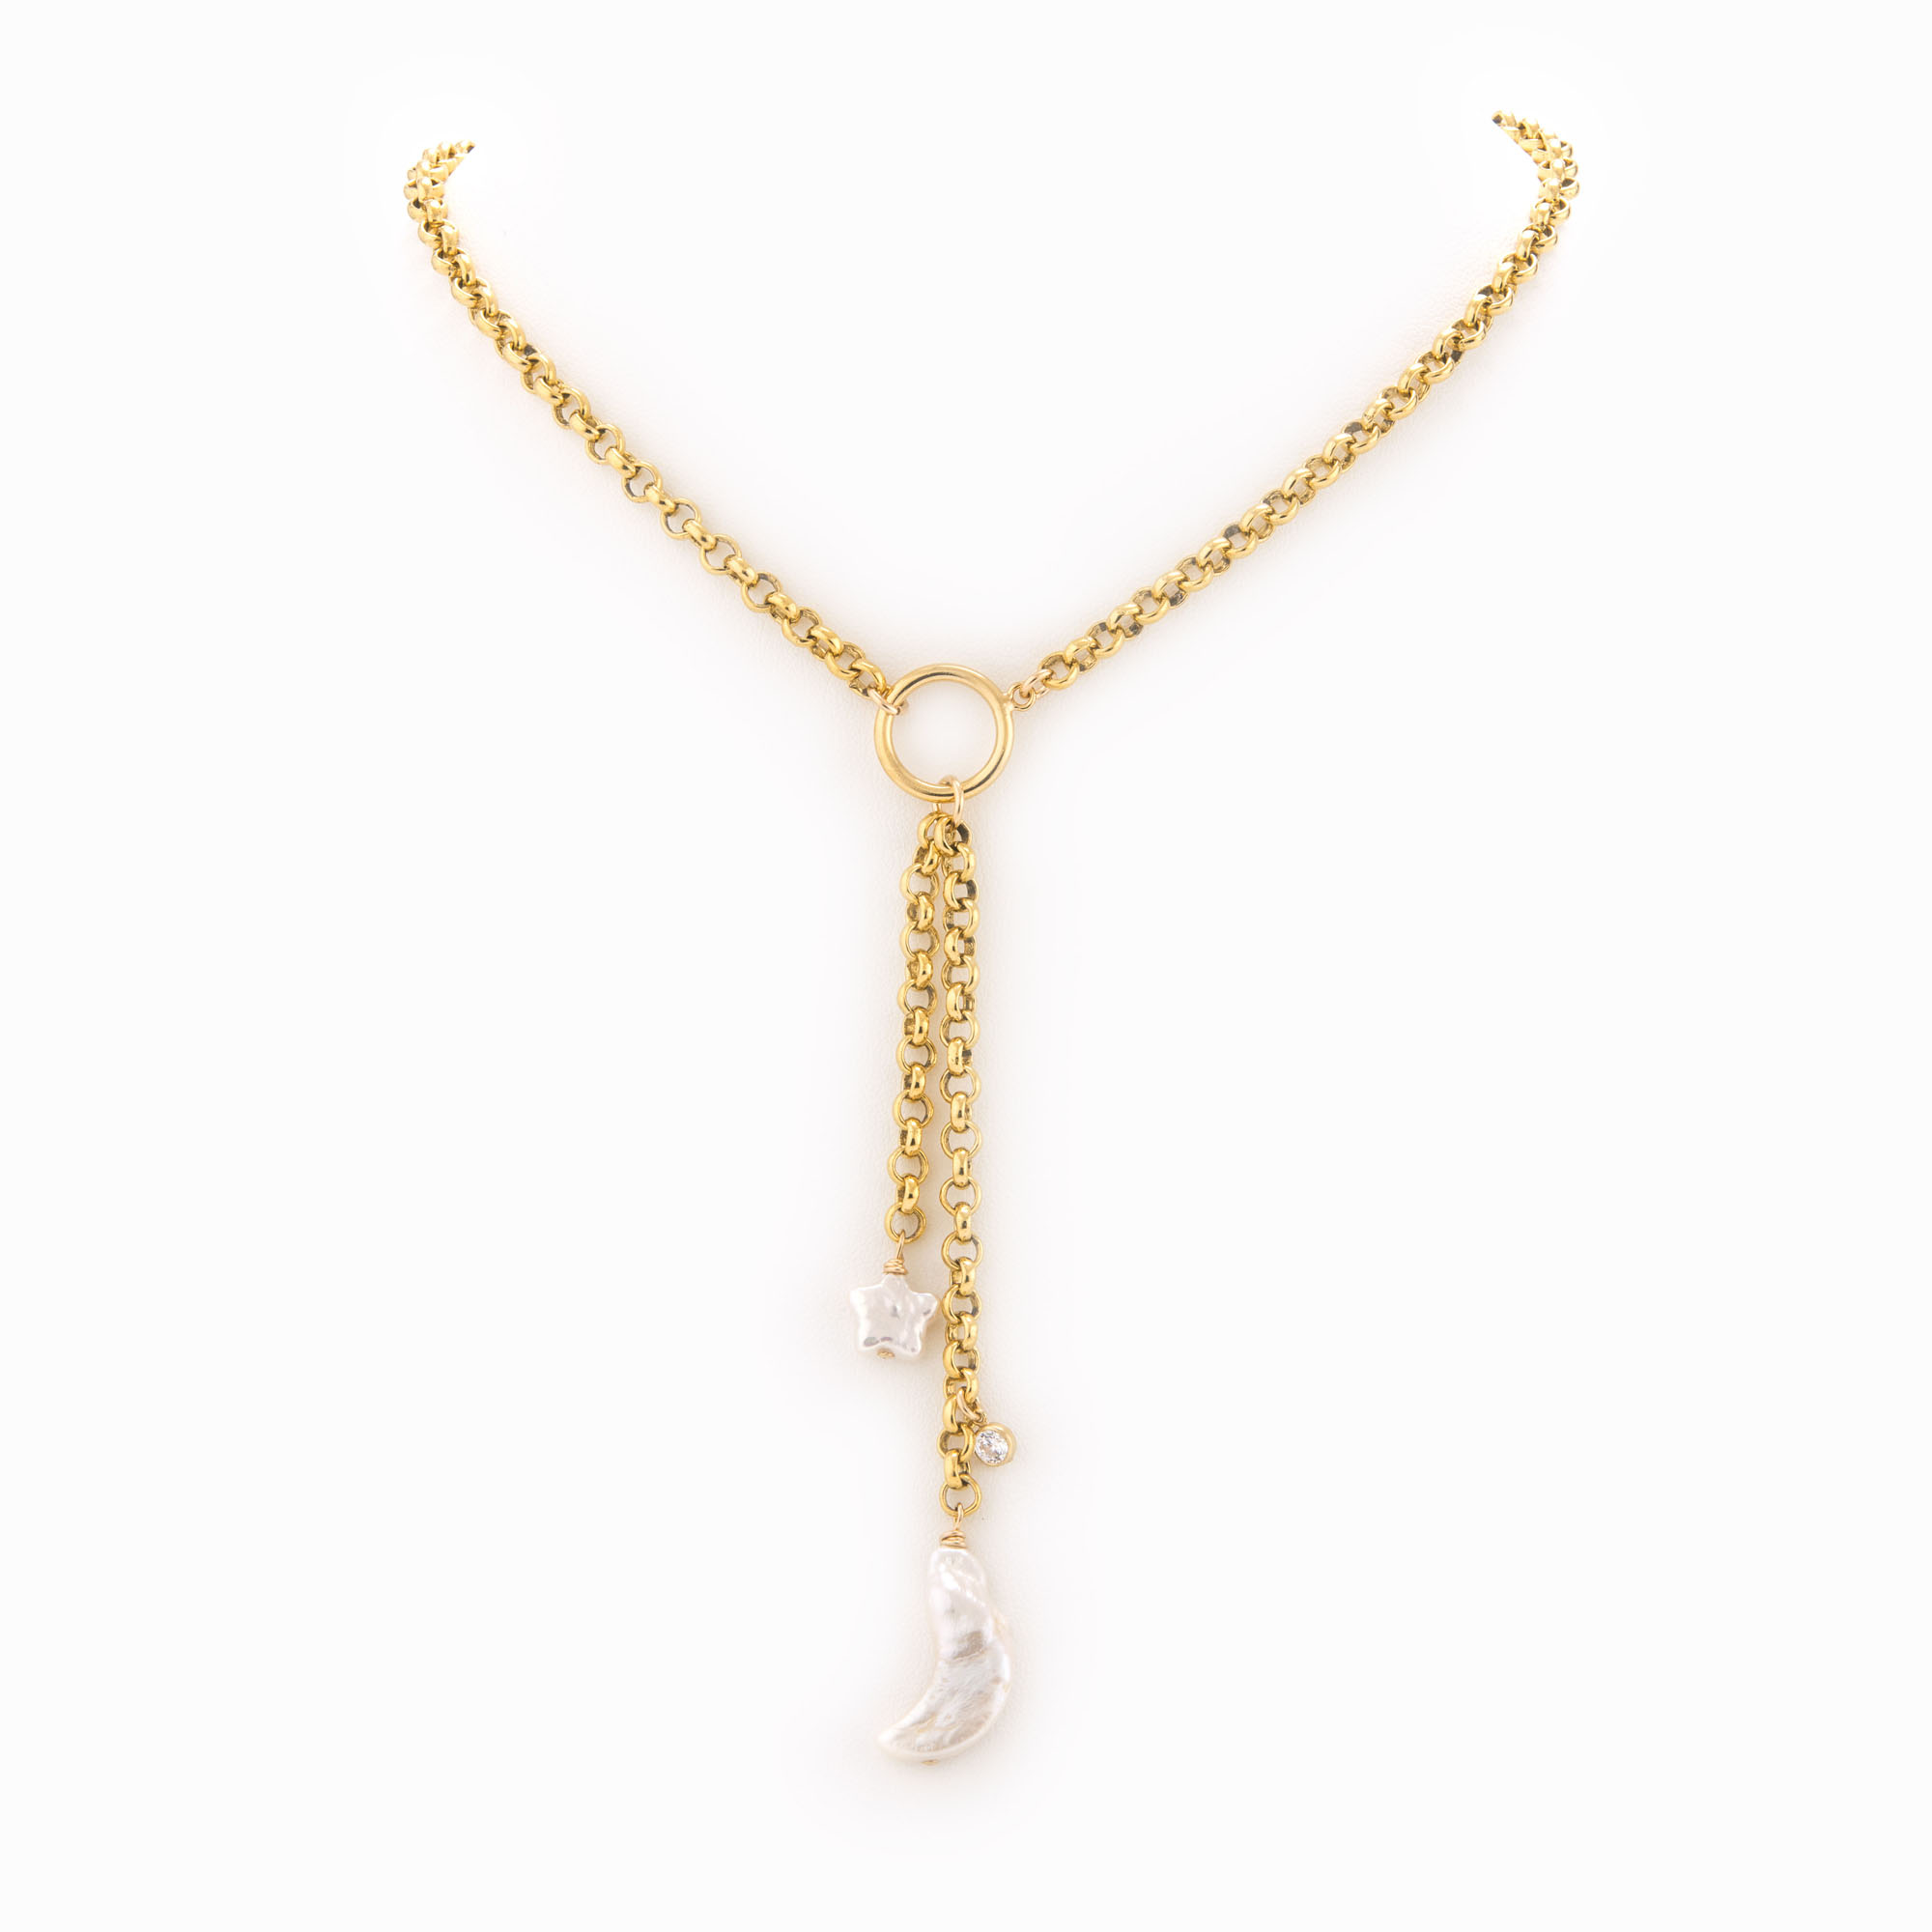 Featured image for “Amaya Brass Necklace”